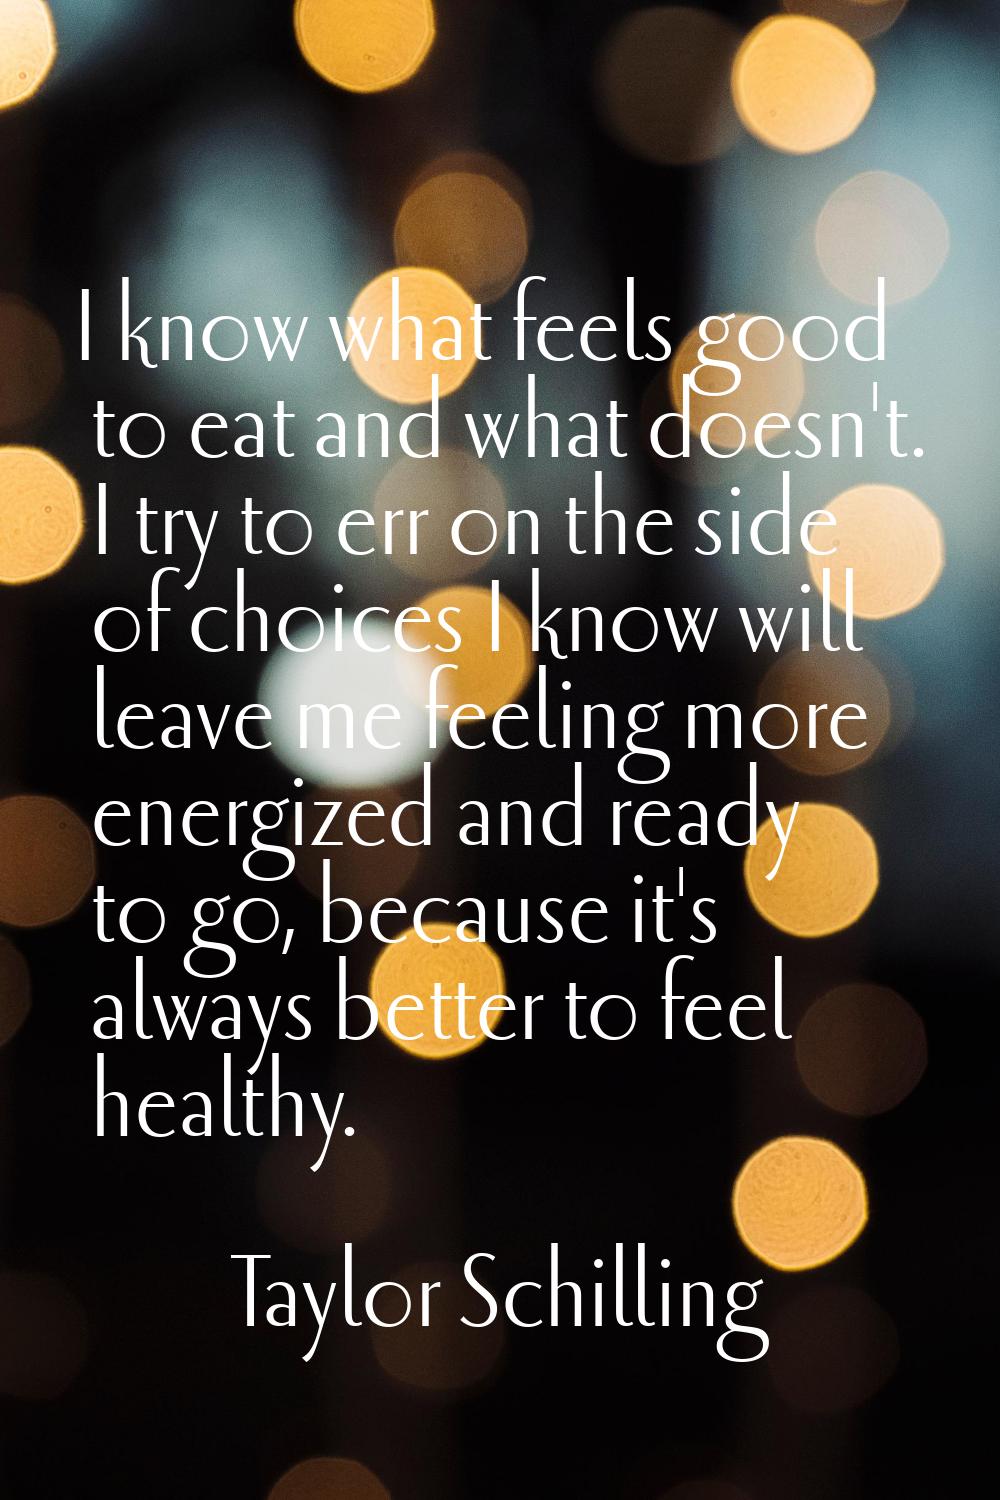 I know what feels good to eat and what doesn't. I try to err on the side of choices I know will lea